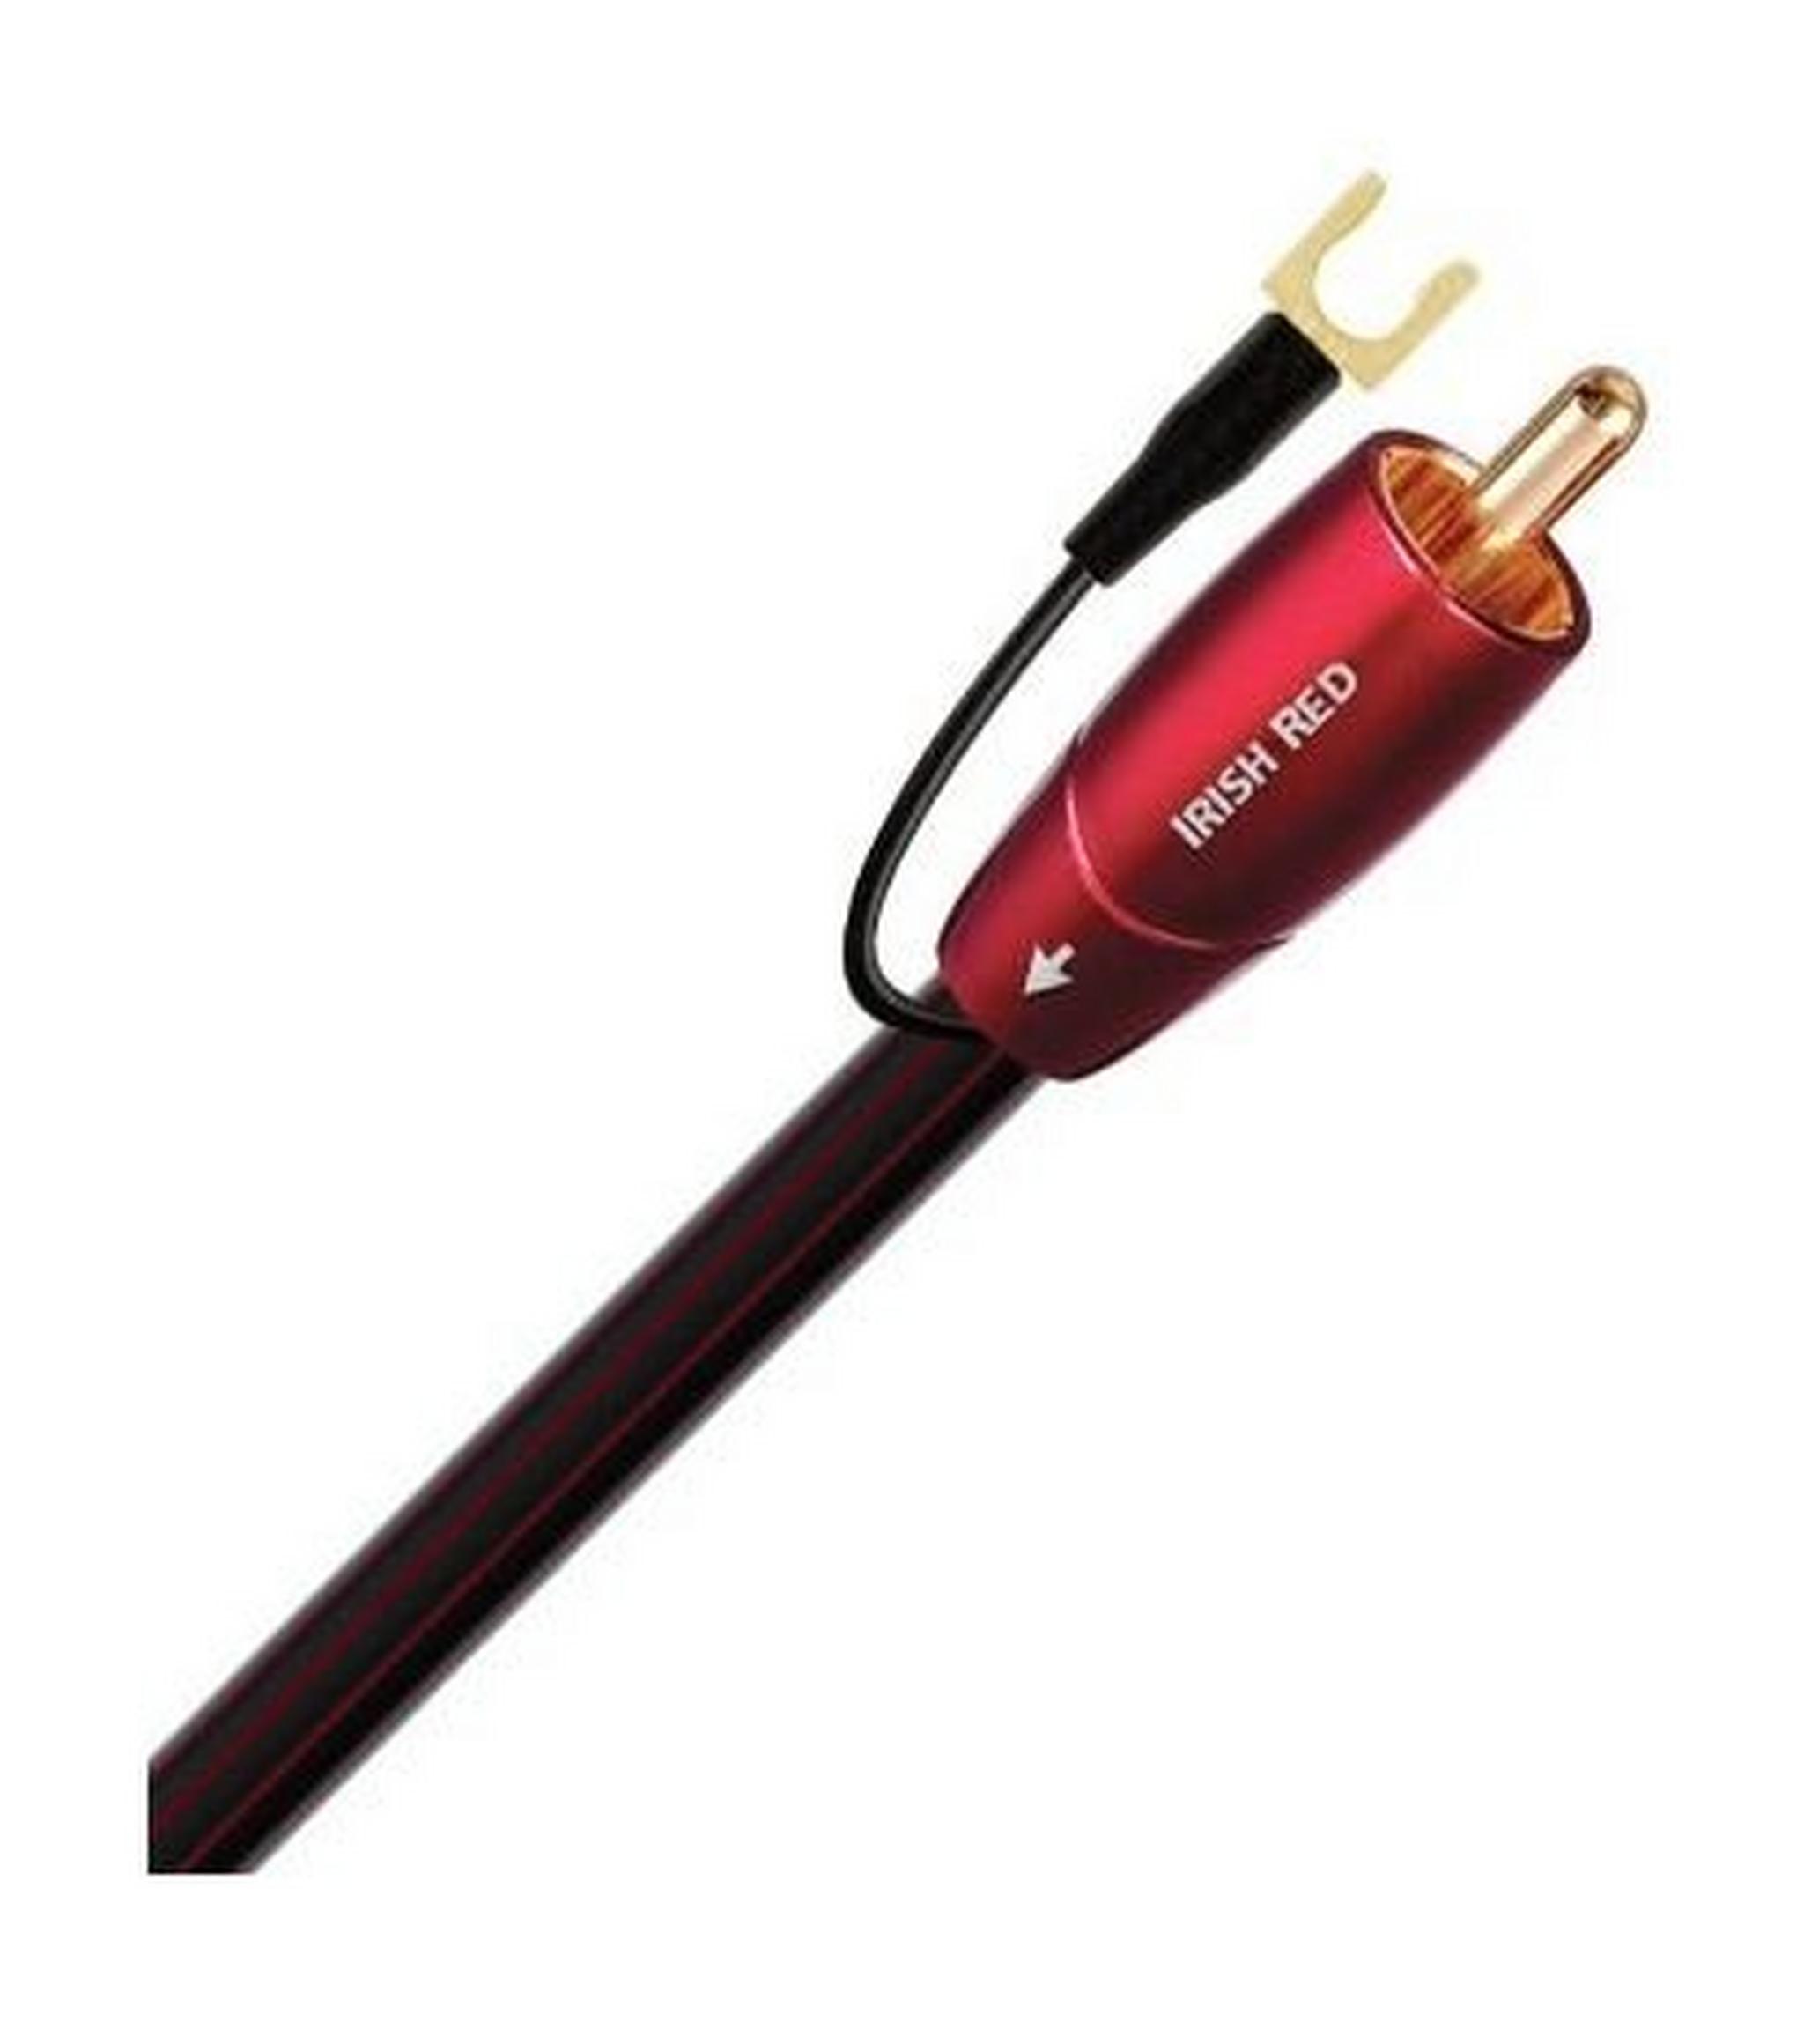 Audioquest Irish Red Subwoofer Cable 5m - IRED05